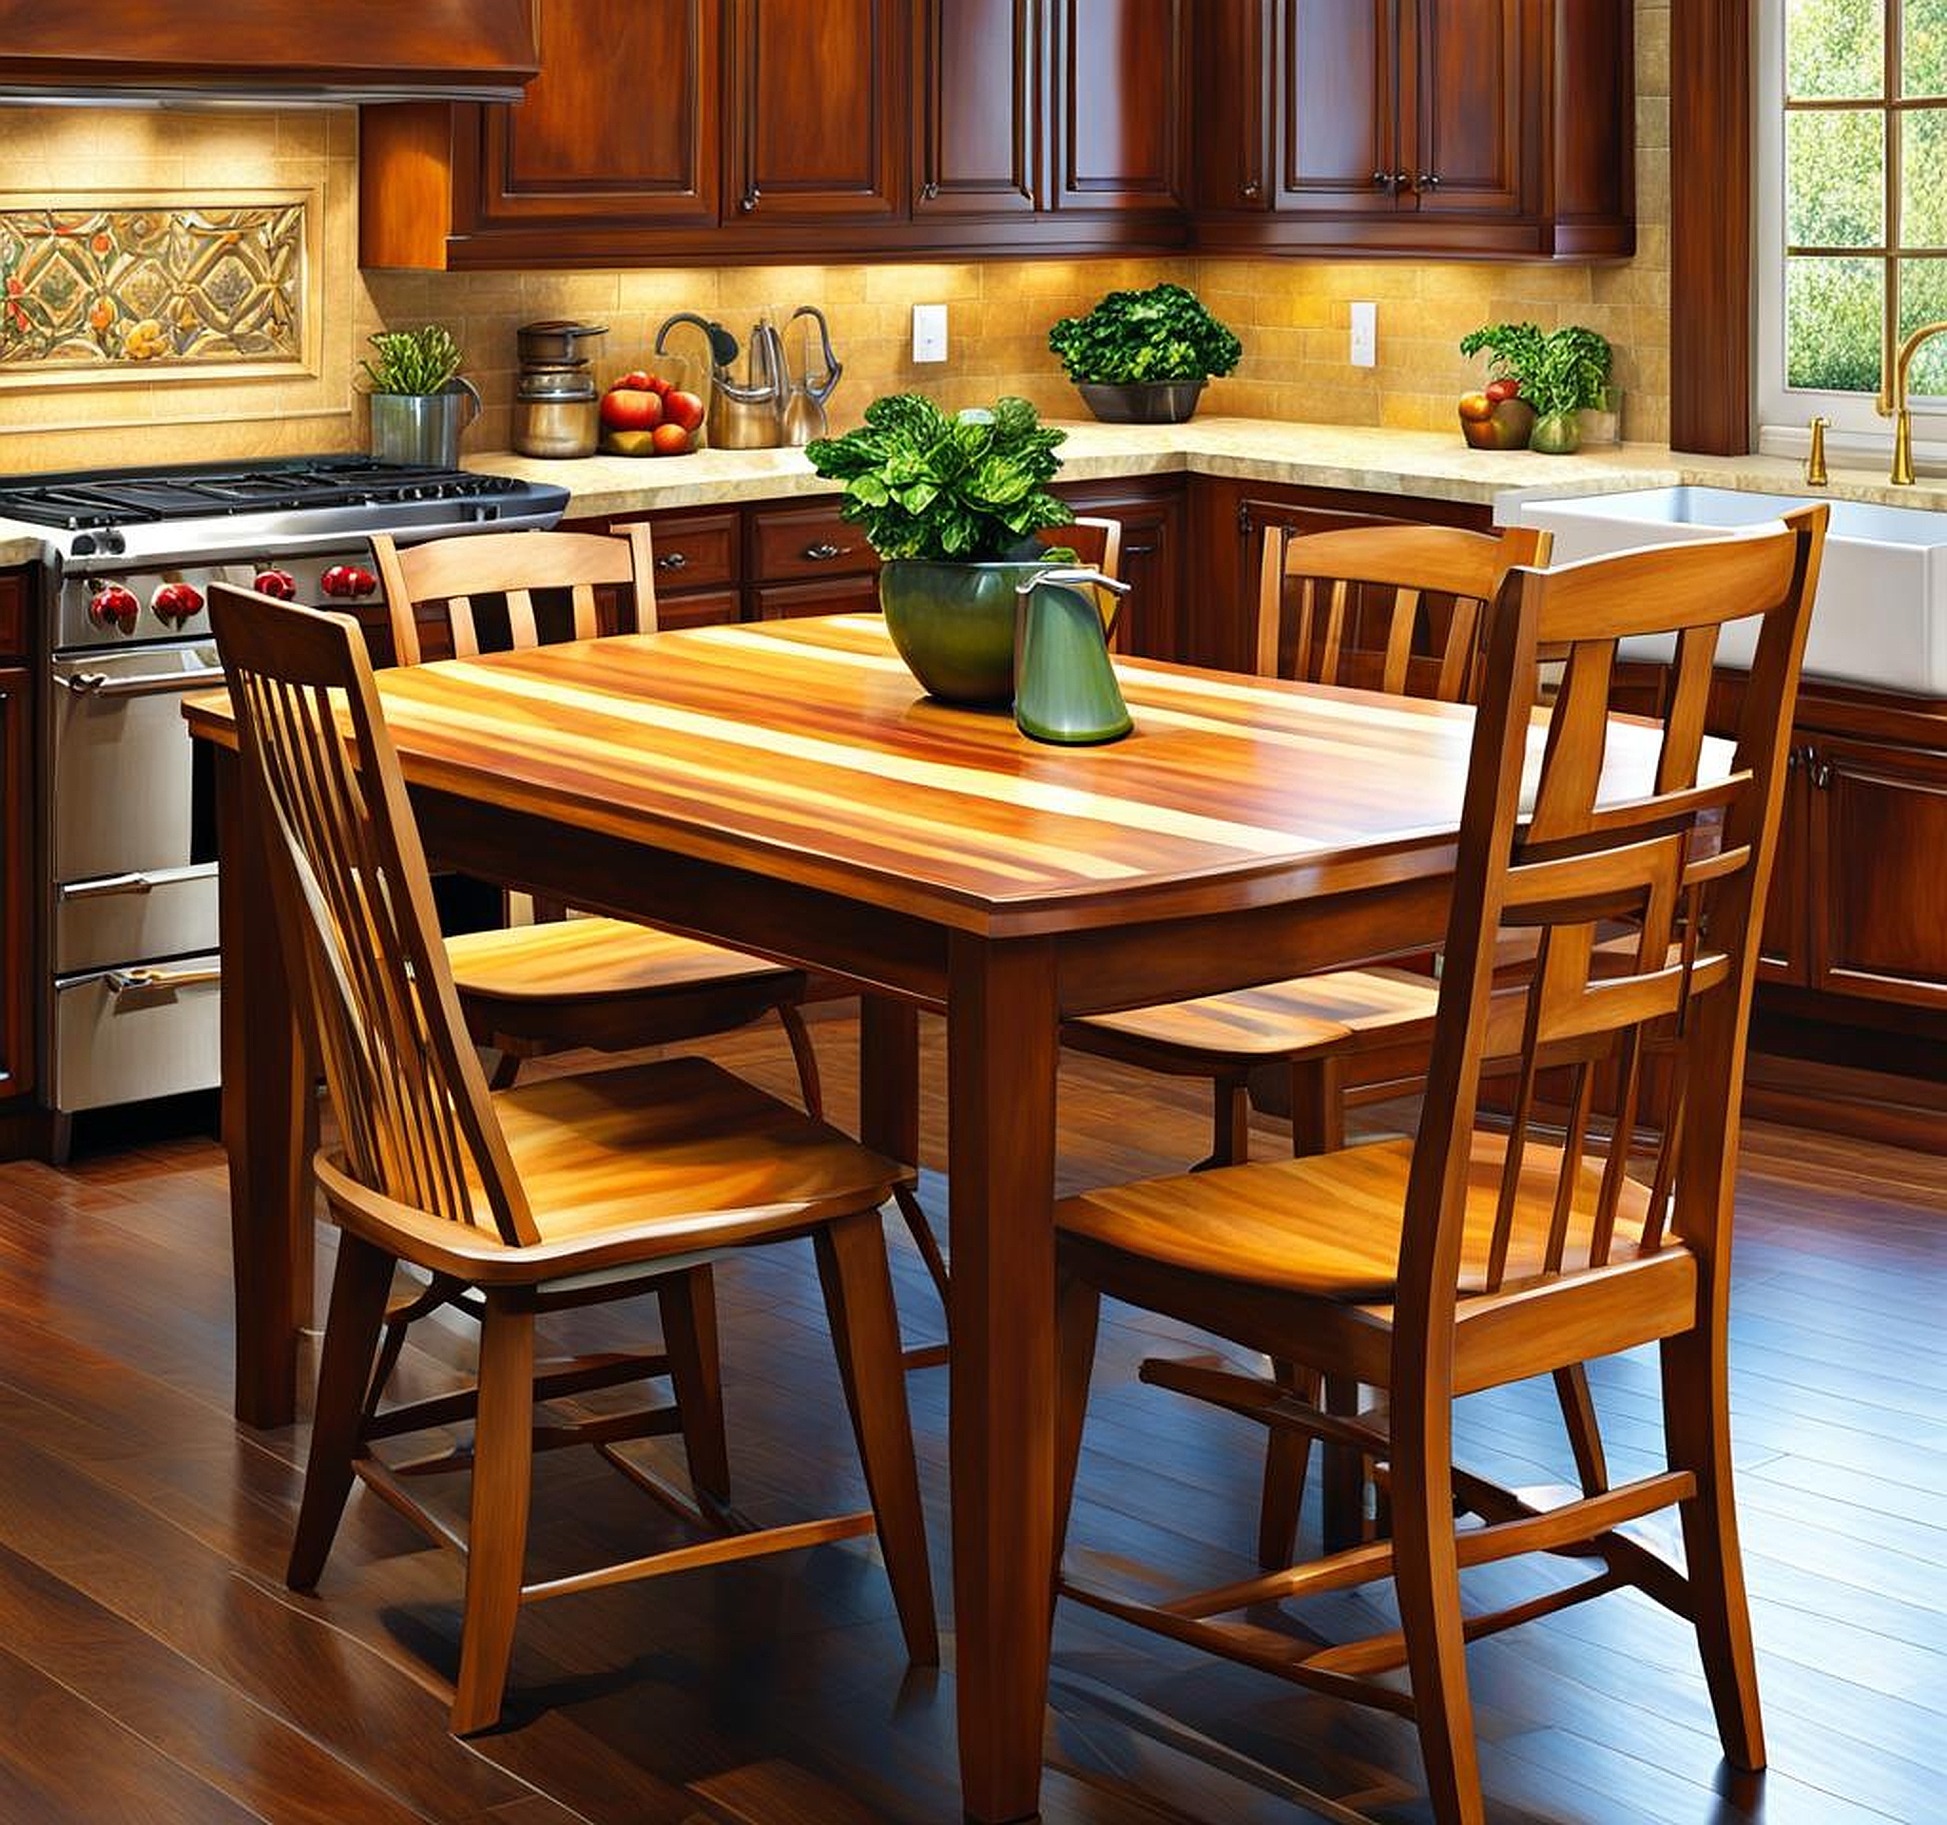 36 X 48 Kitchen Table Styles Perfect for Small and Large Kitchens